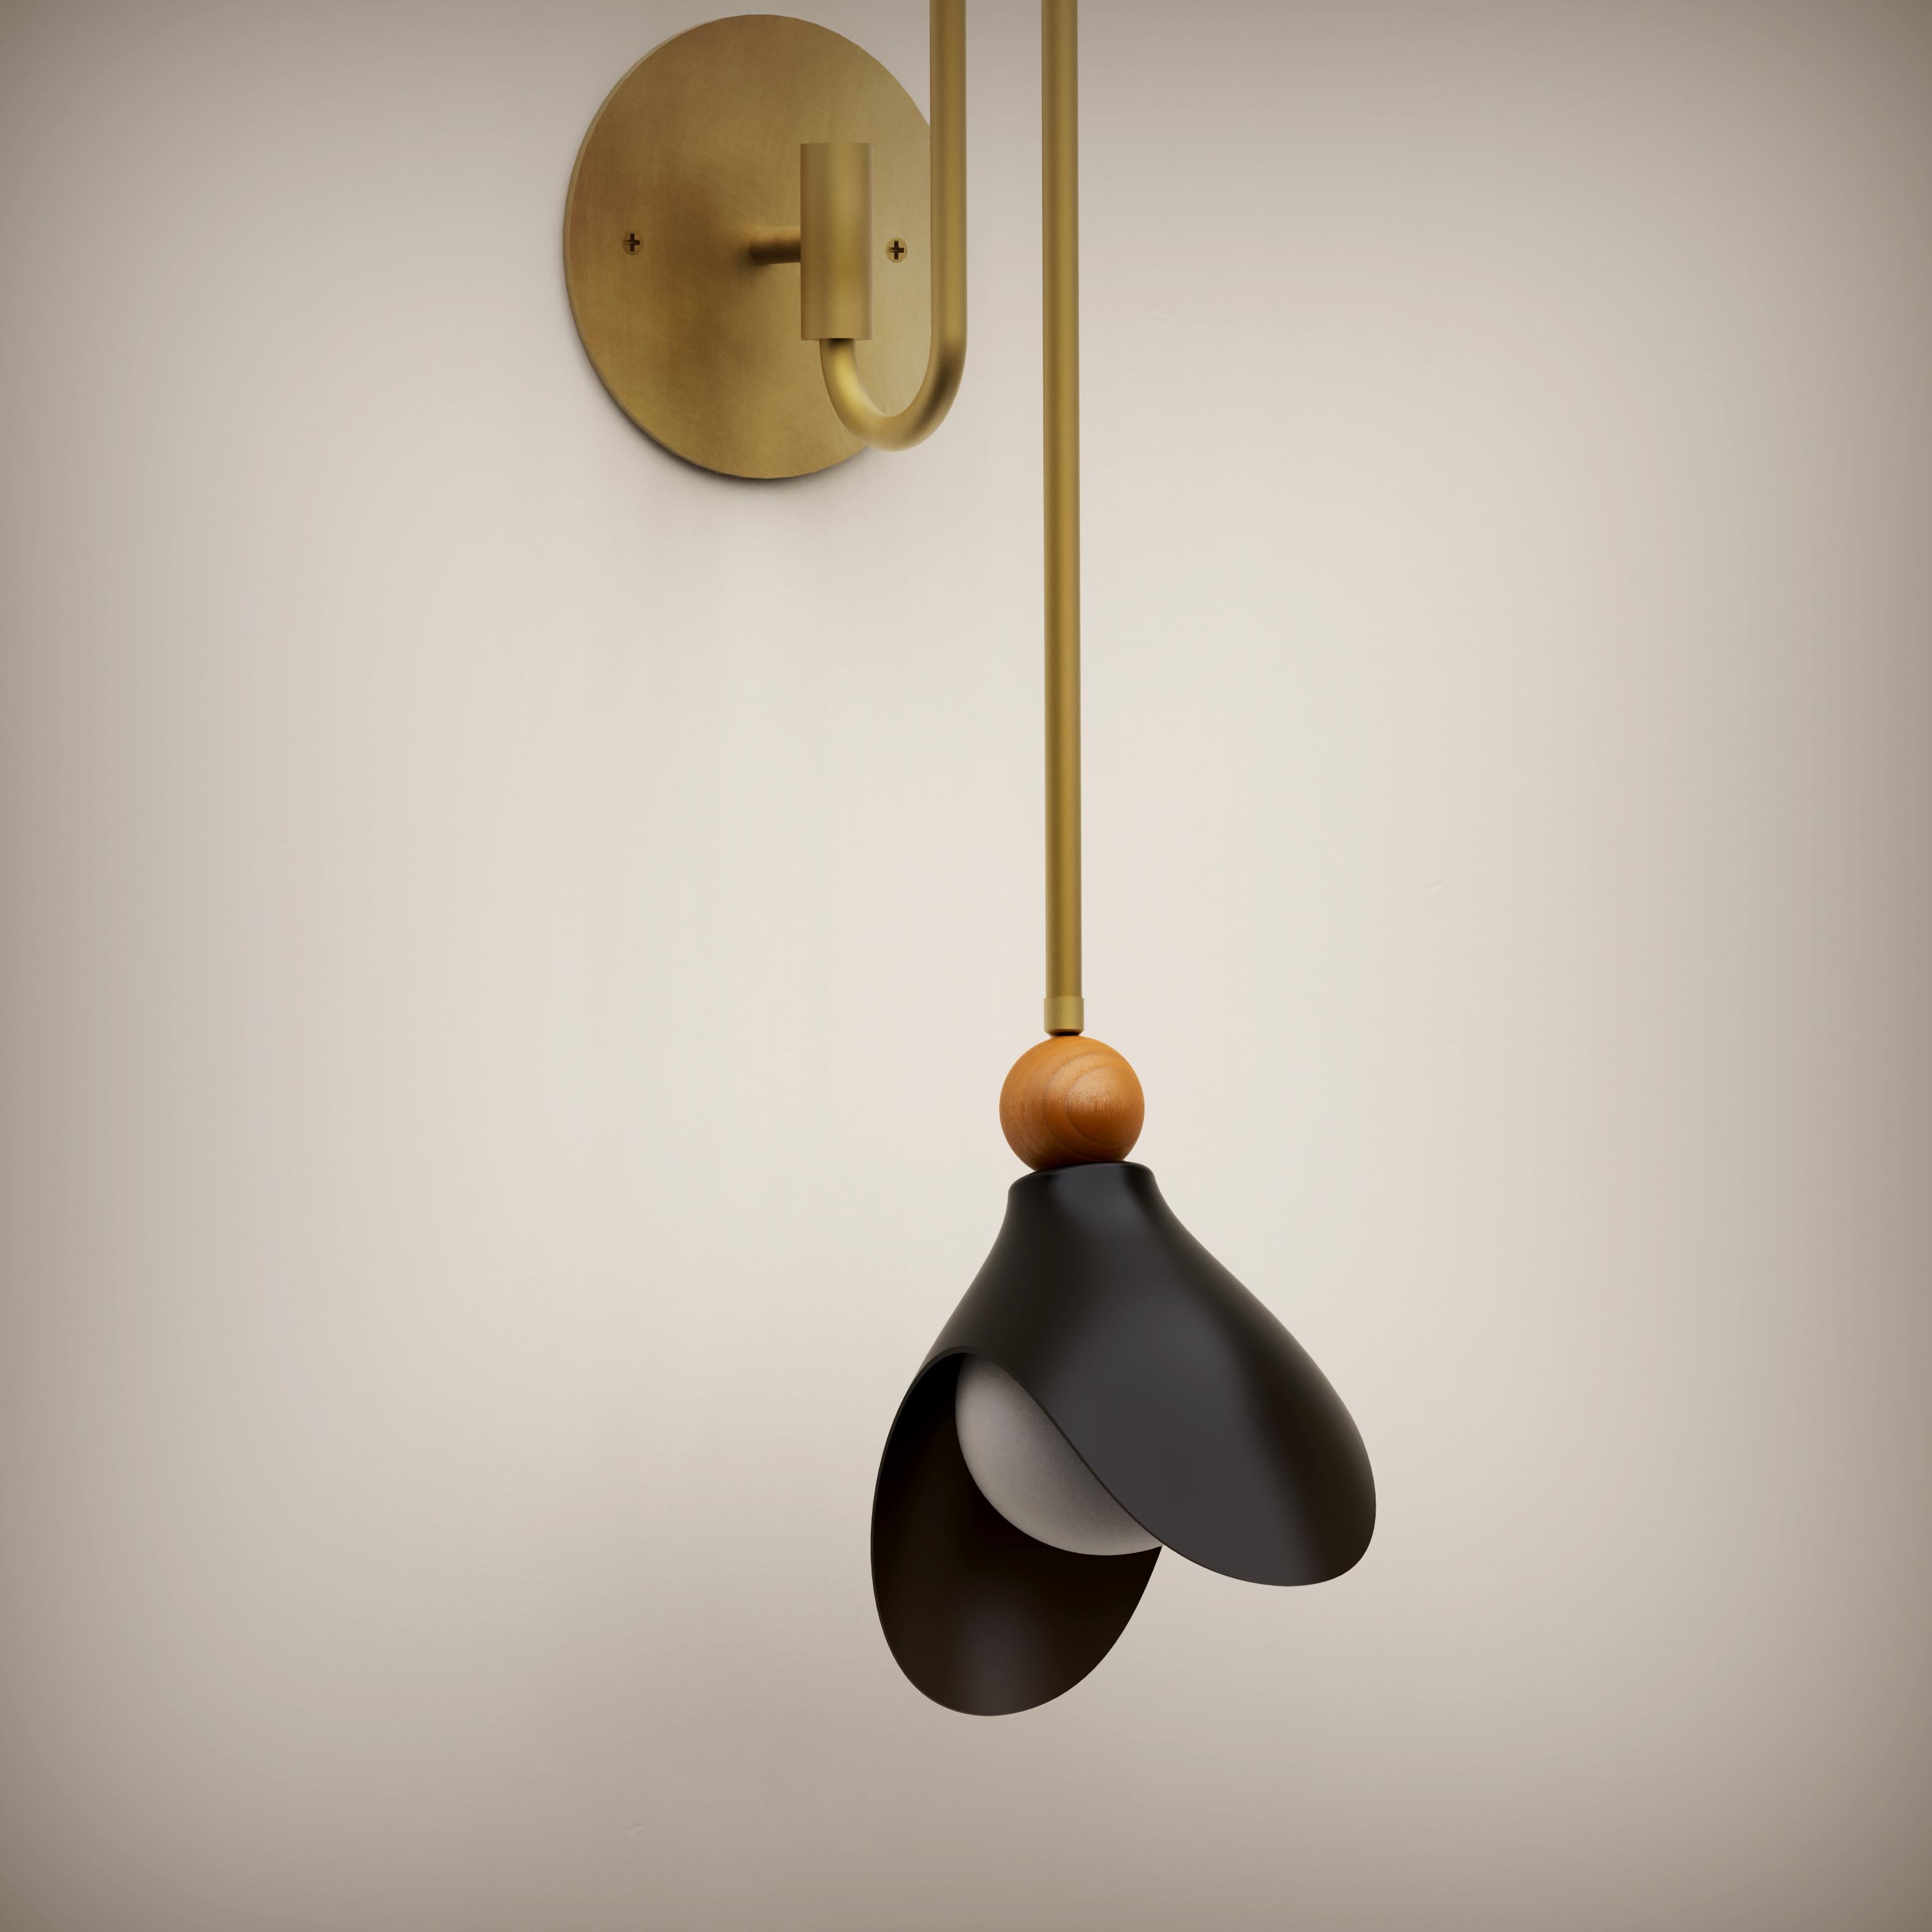 LILY Wall Sconce in Enamel, Brass & Walnut, Ginger Curtis x Blueprint Lighting In New Condition For Sale In New York, NY